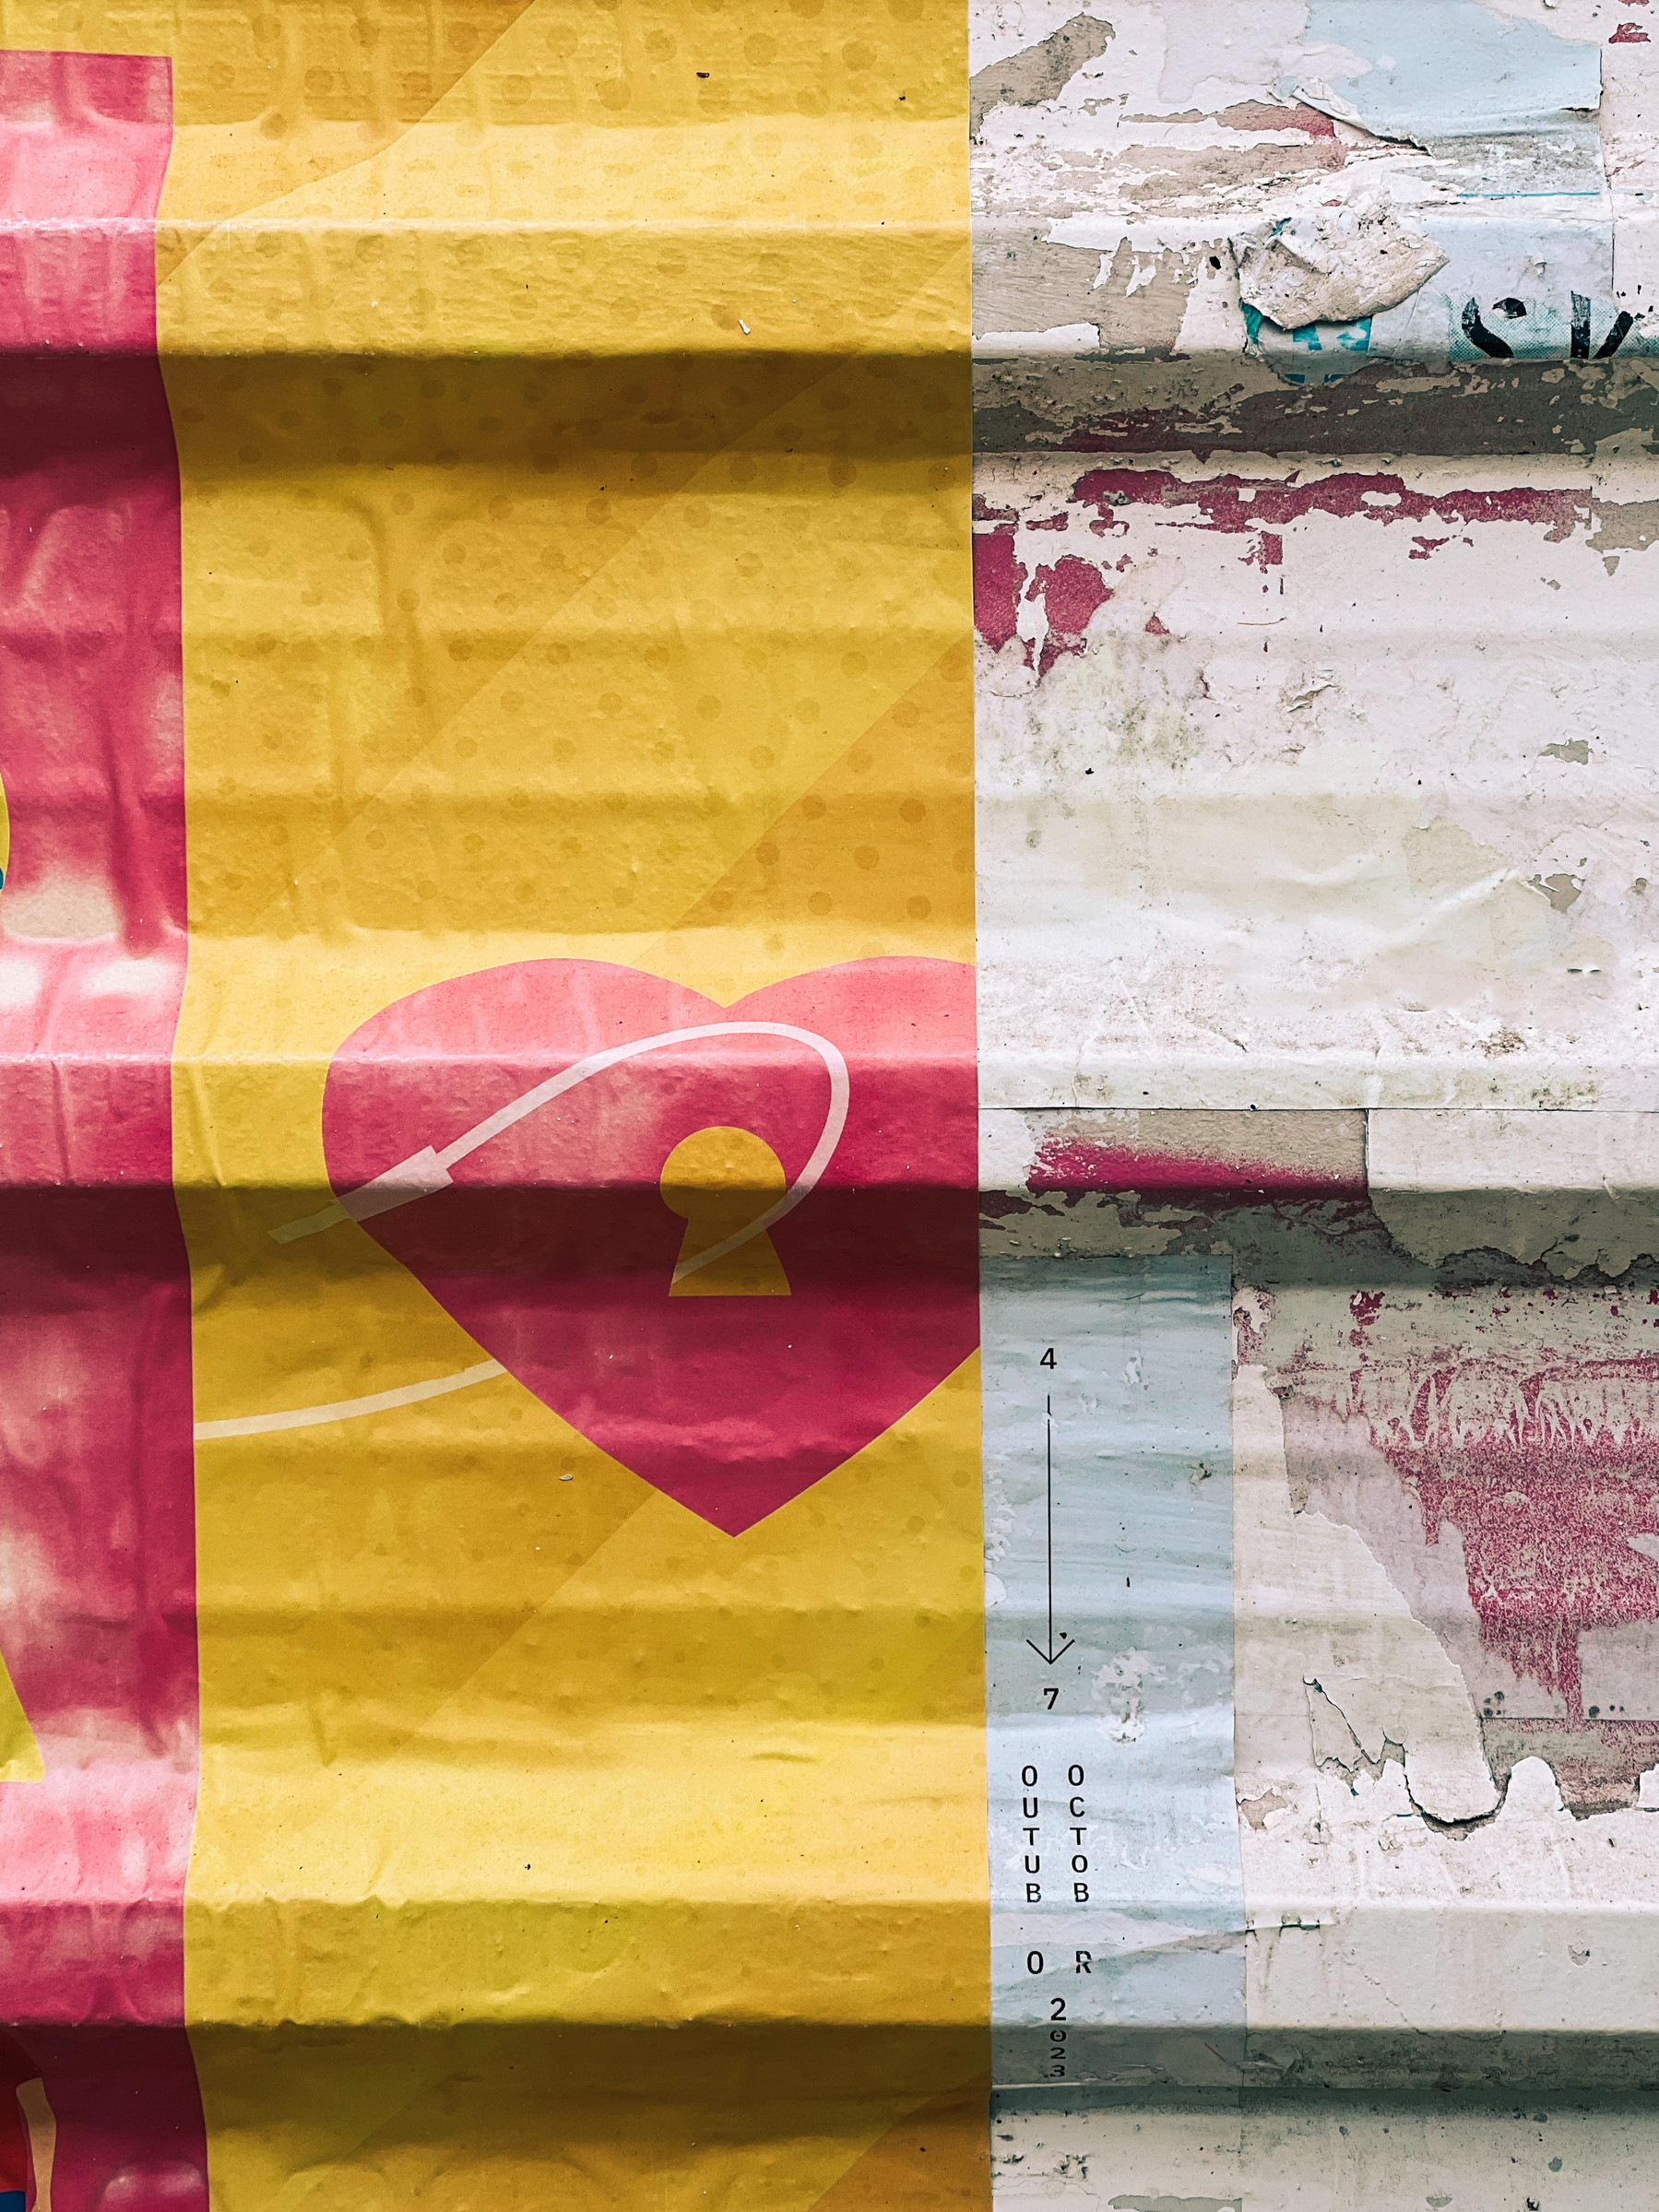 This image shows a juxtaposition of two different textures. On the left side, there is a vibrant, yellow and pink patterned poster with a graphic design that includes a heart shape. On the right side, a weathered wall with peeling layers.